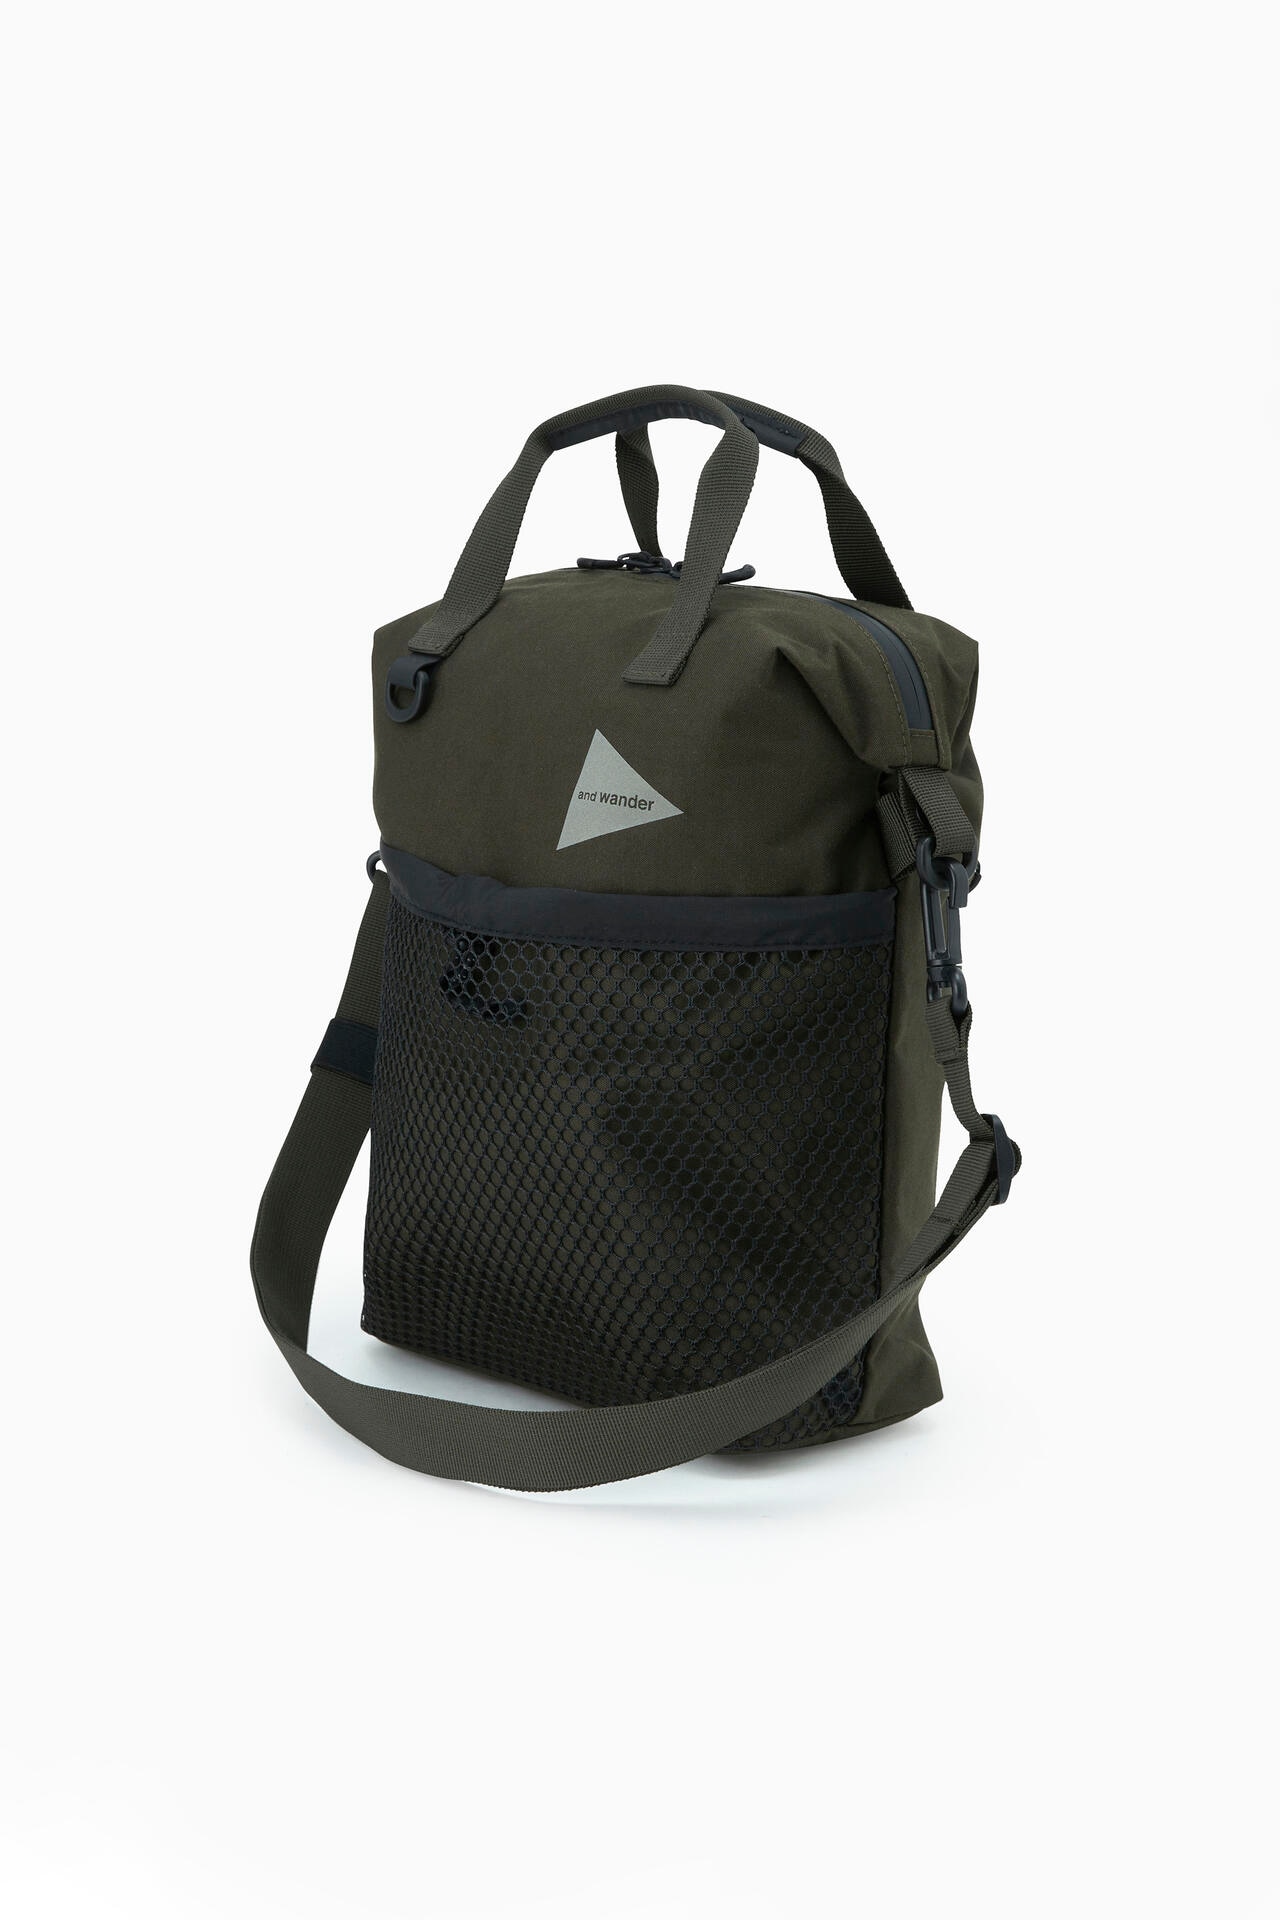 PE/CO 2way bag | bags | and wander ONLINE STORE